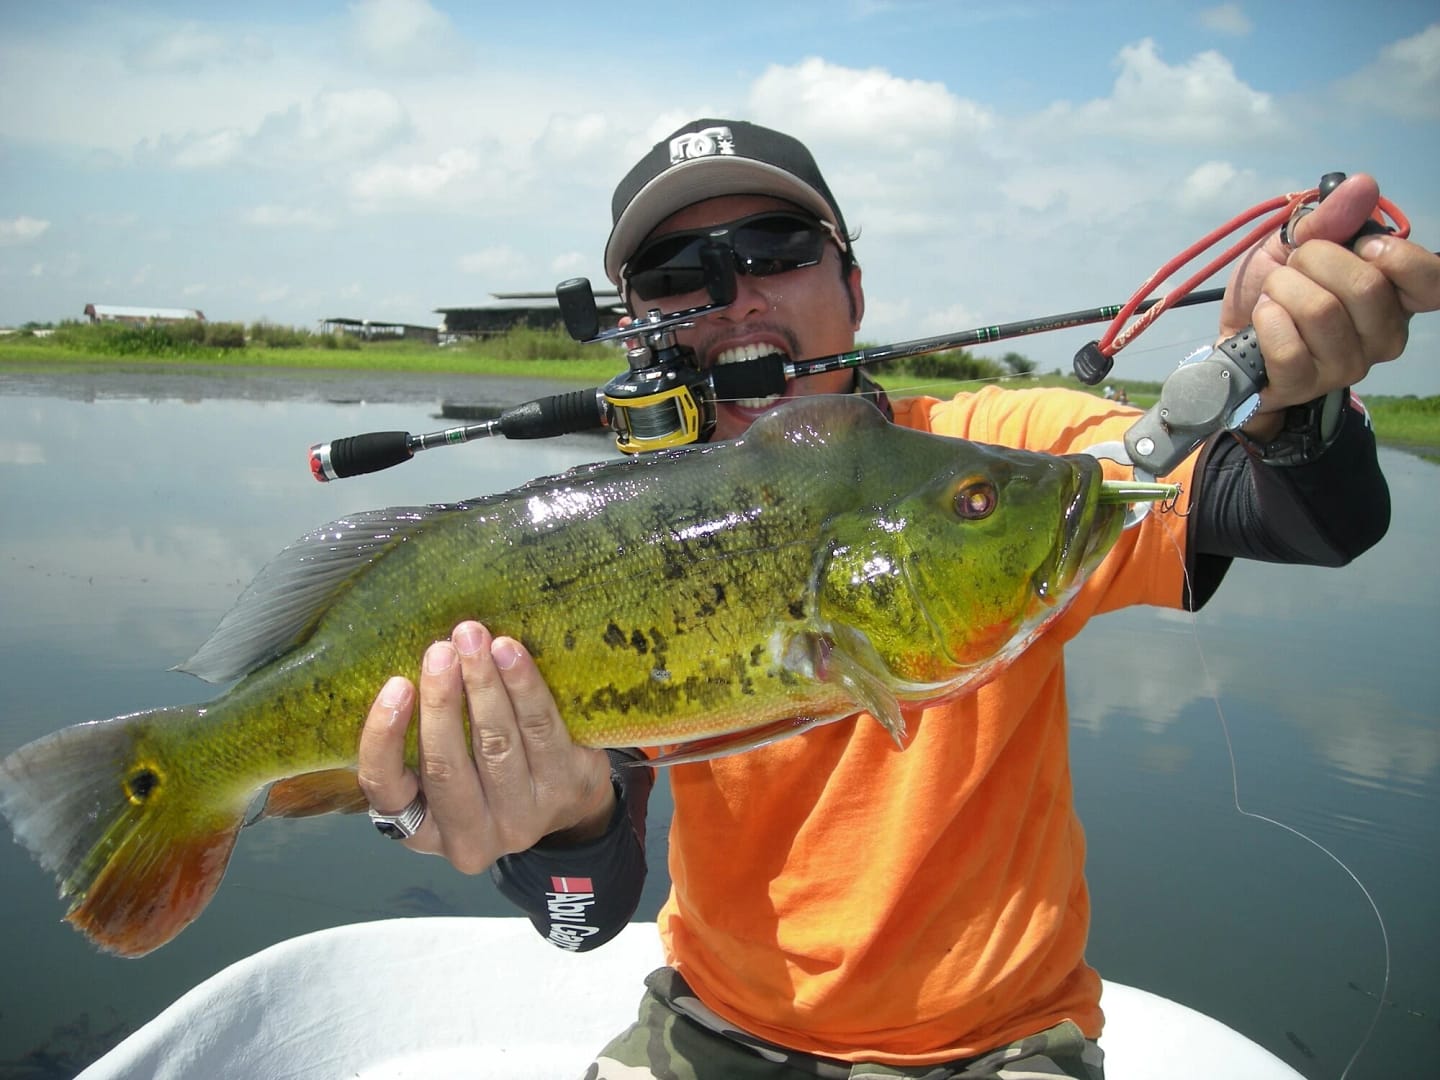 How to Catch Bass: The Best Fishing Tips No One Told You